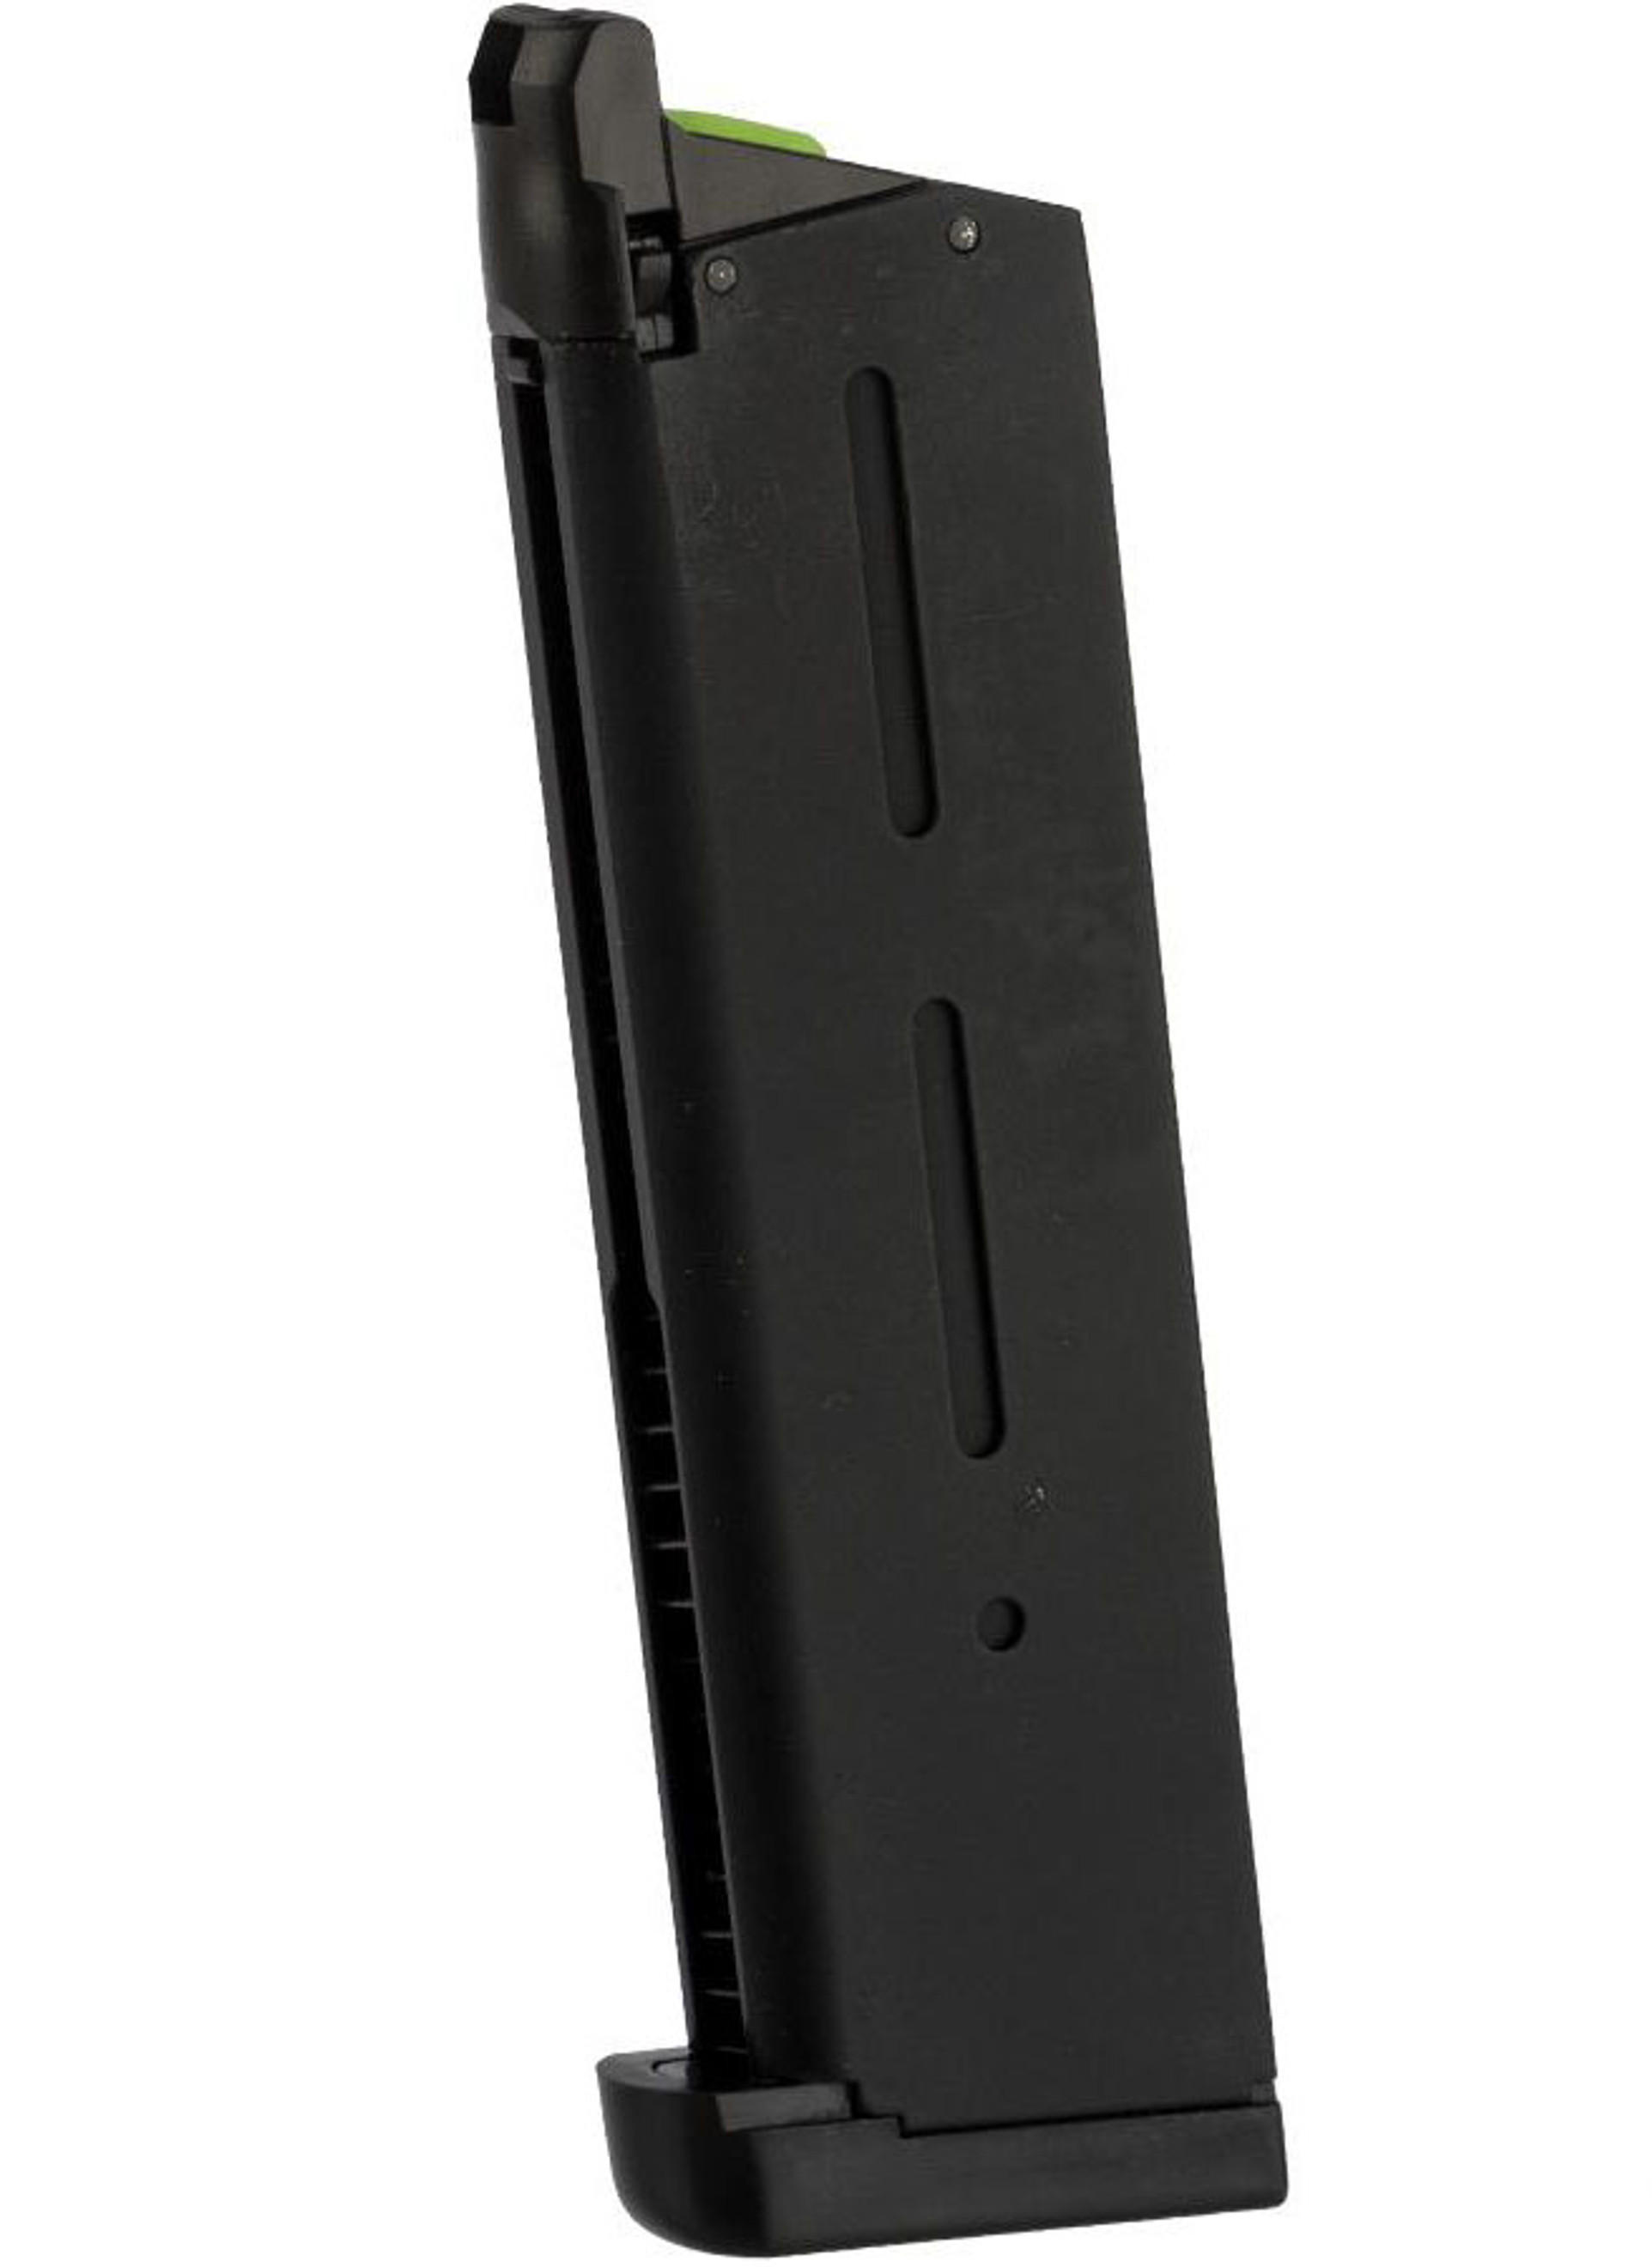 APS Single Stack 1911 Gas Magazine for TM Compatible 1911 Series GBB Pistols